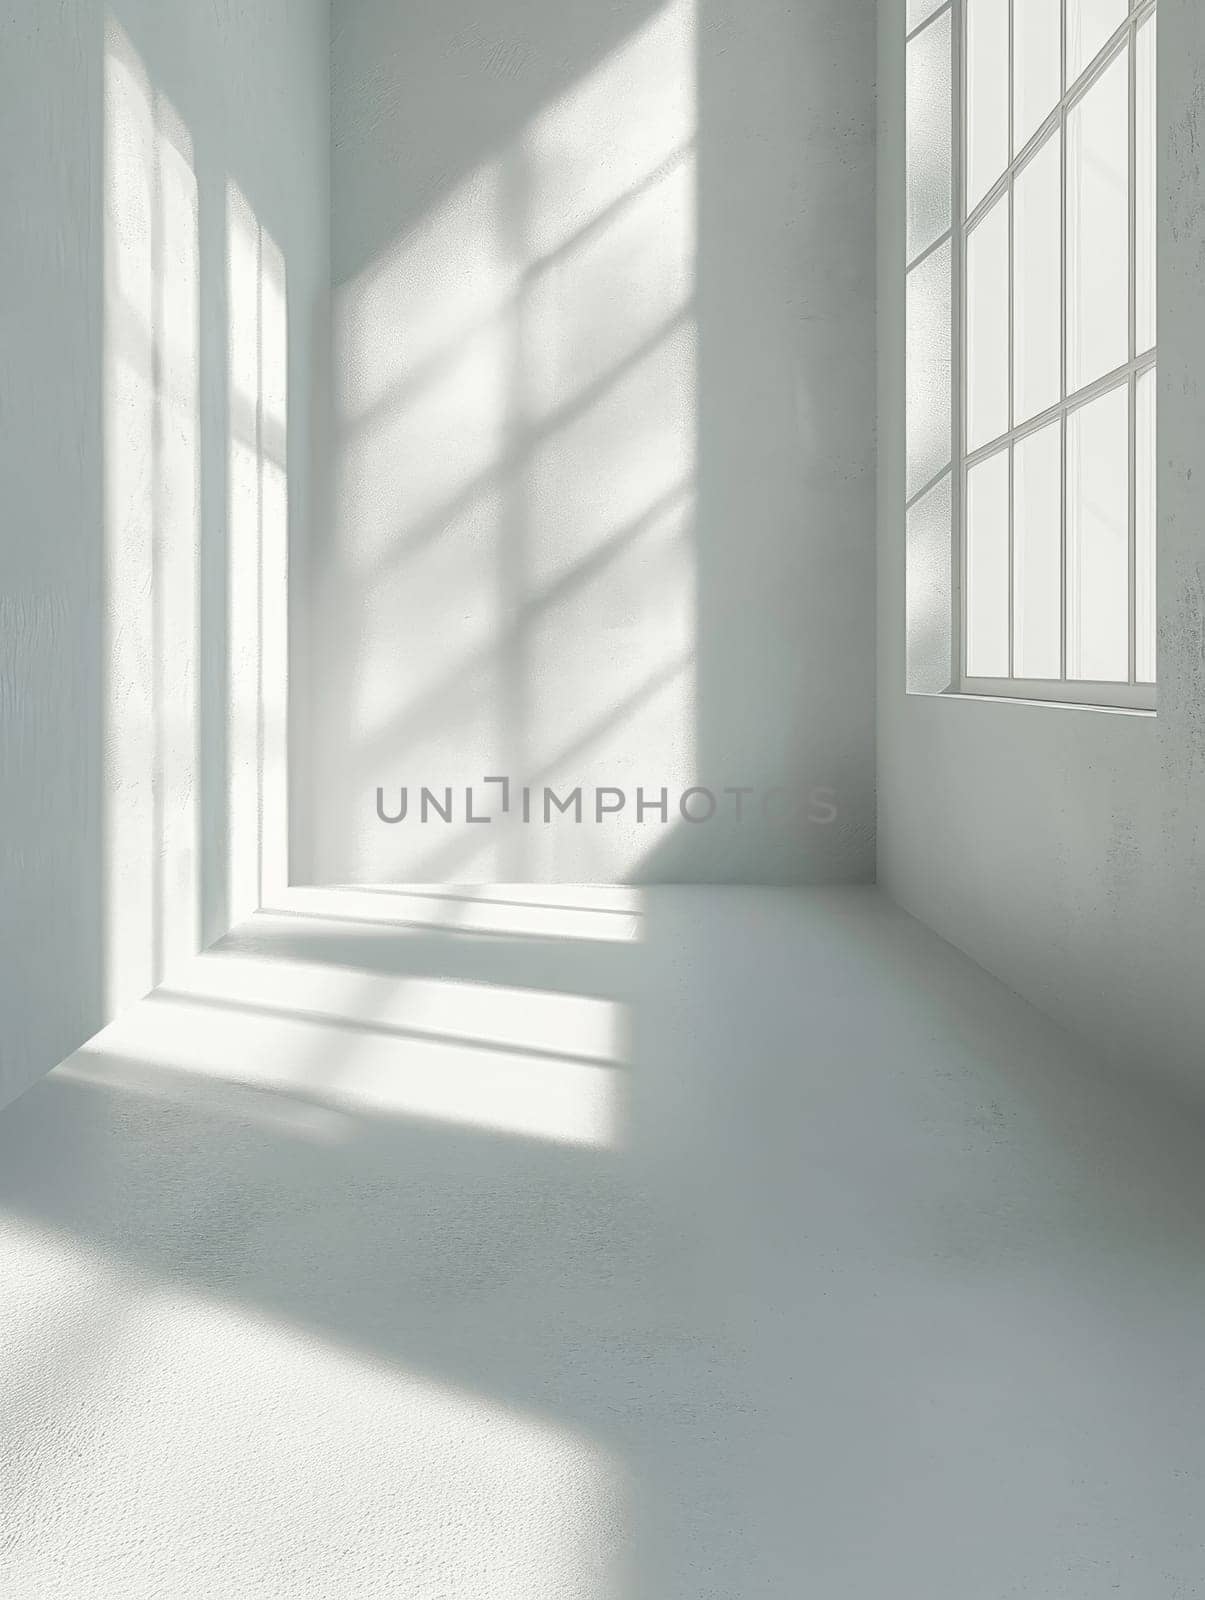 A white wall with a tree branch casting a shadow on it. The shadow is the main focus of the image